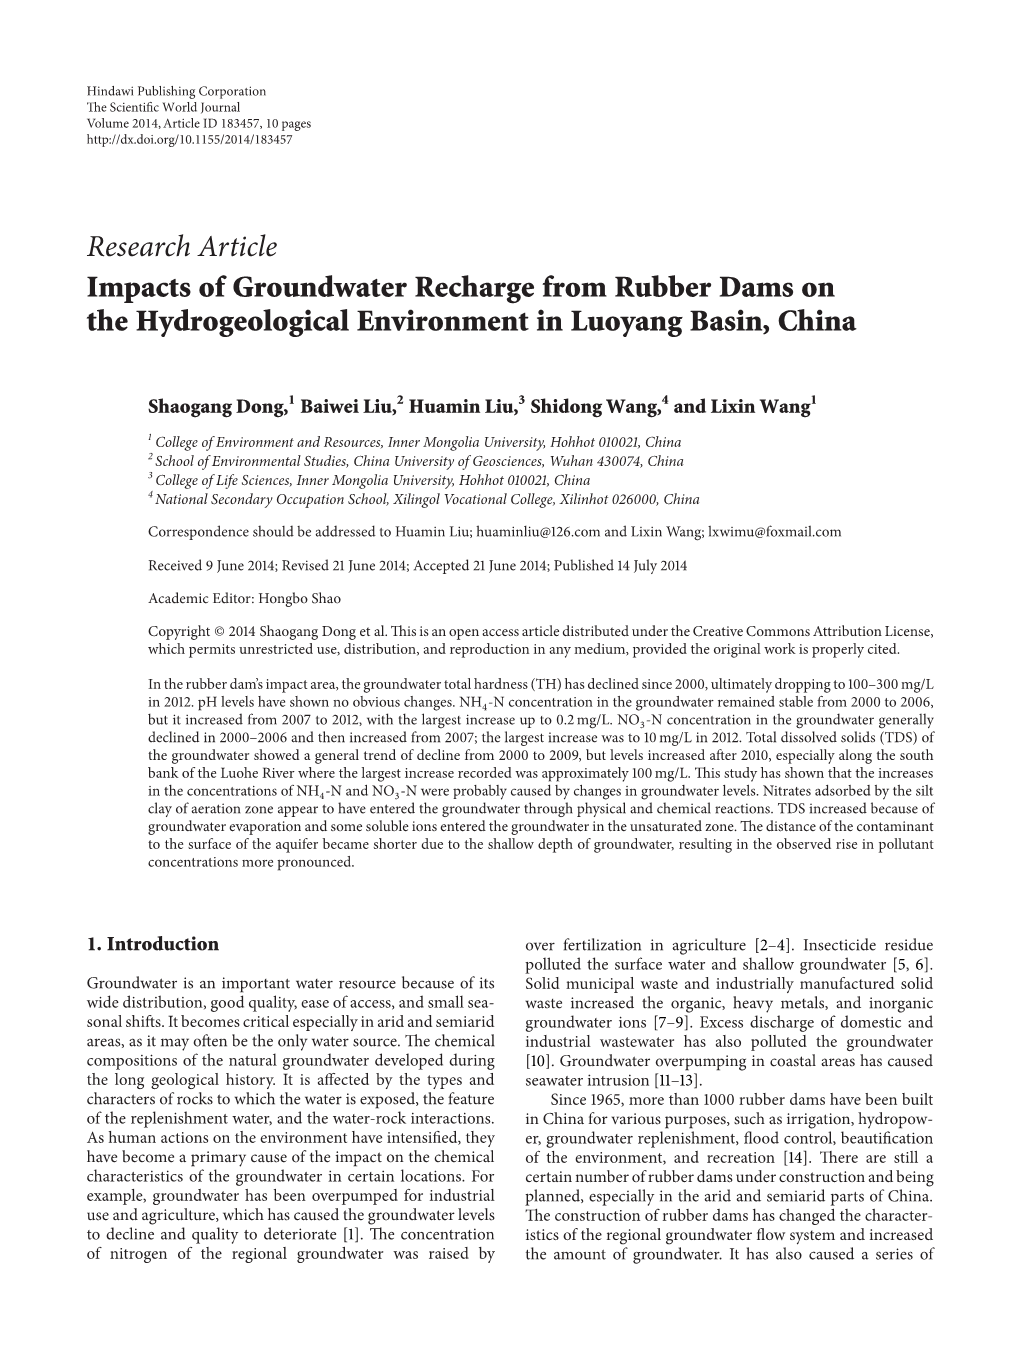 Impacts of Groundwater Recharge from Rubber Dams on the Hydrogeological Environment in Luoyang Basin, China